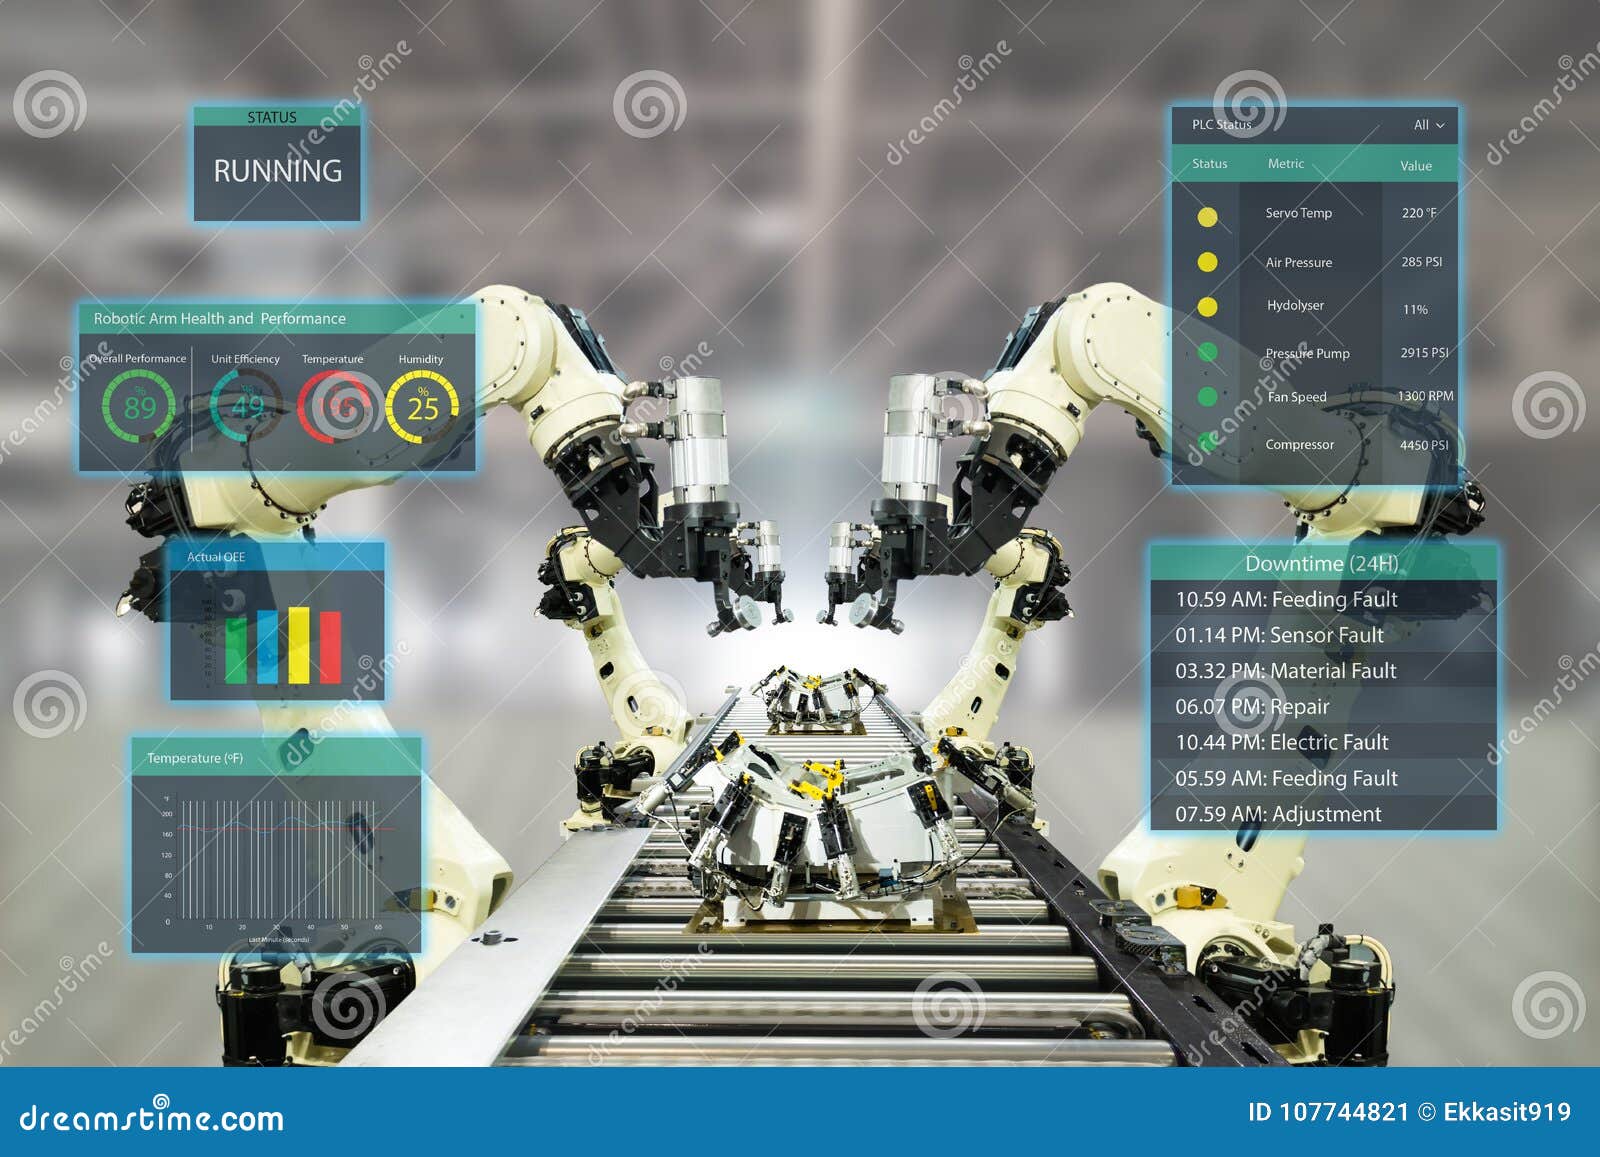 iot industry 4.0 concept.smart factory using automation robotic arms with augmented mixed virtual reality technology to show data